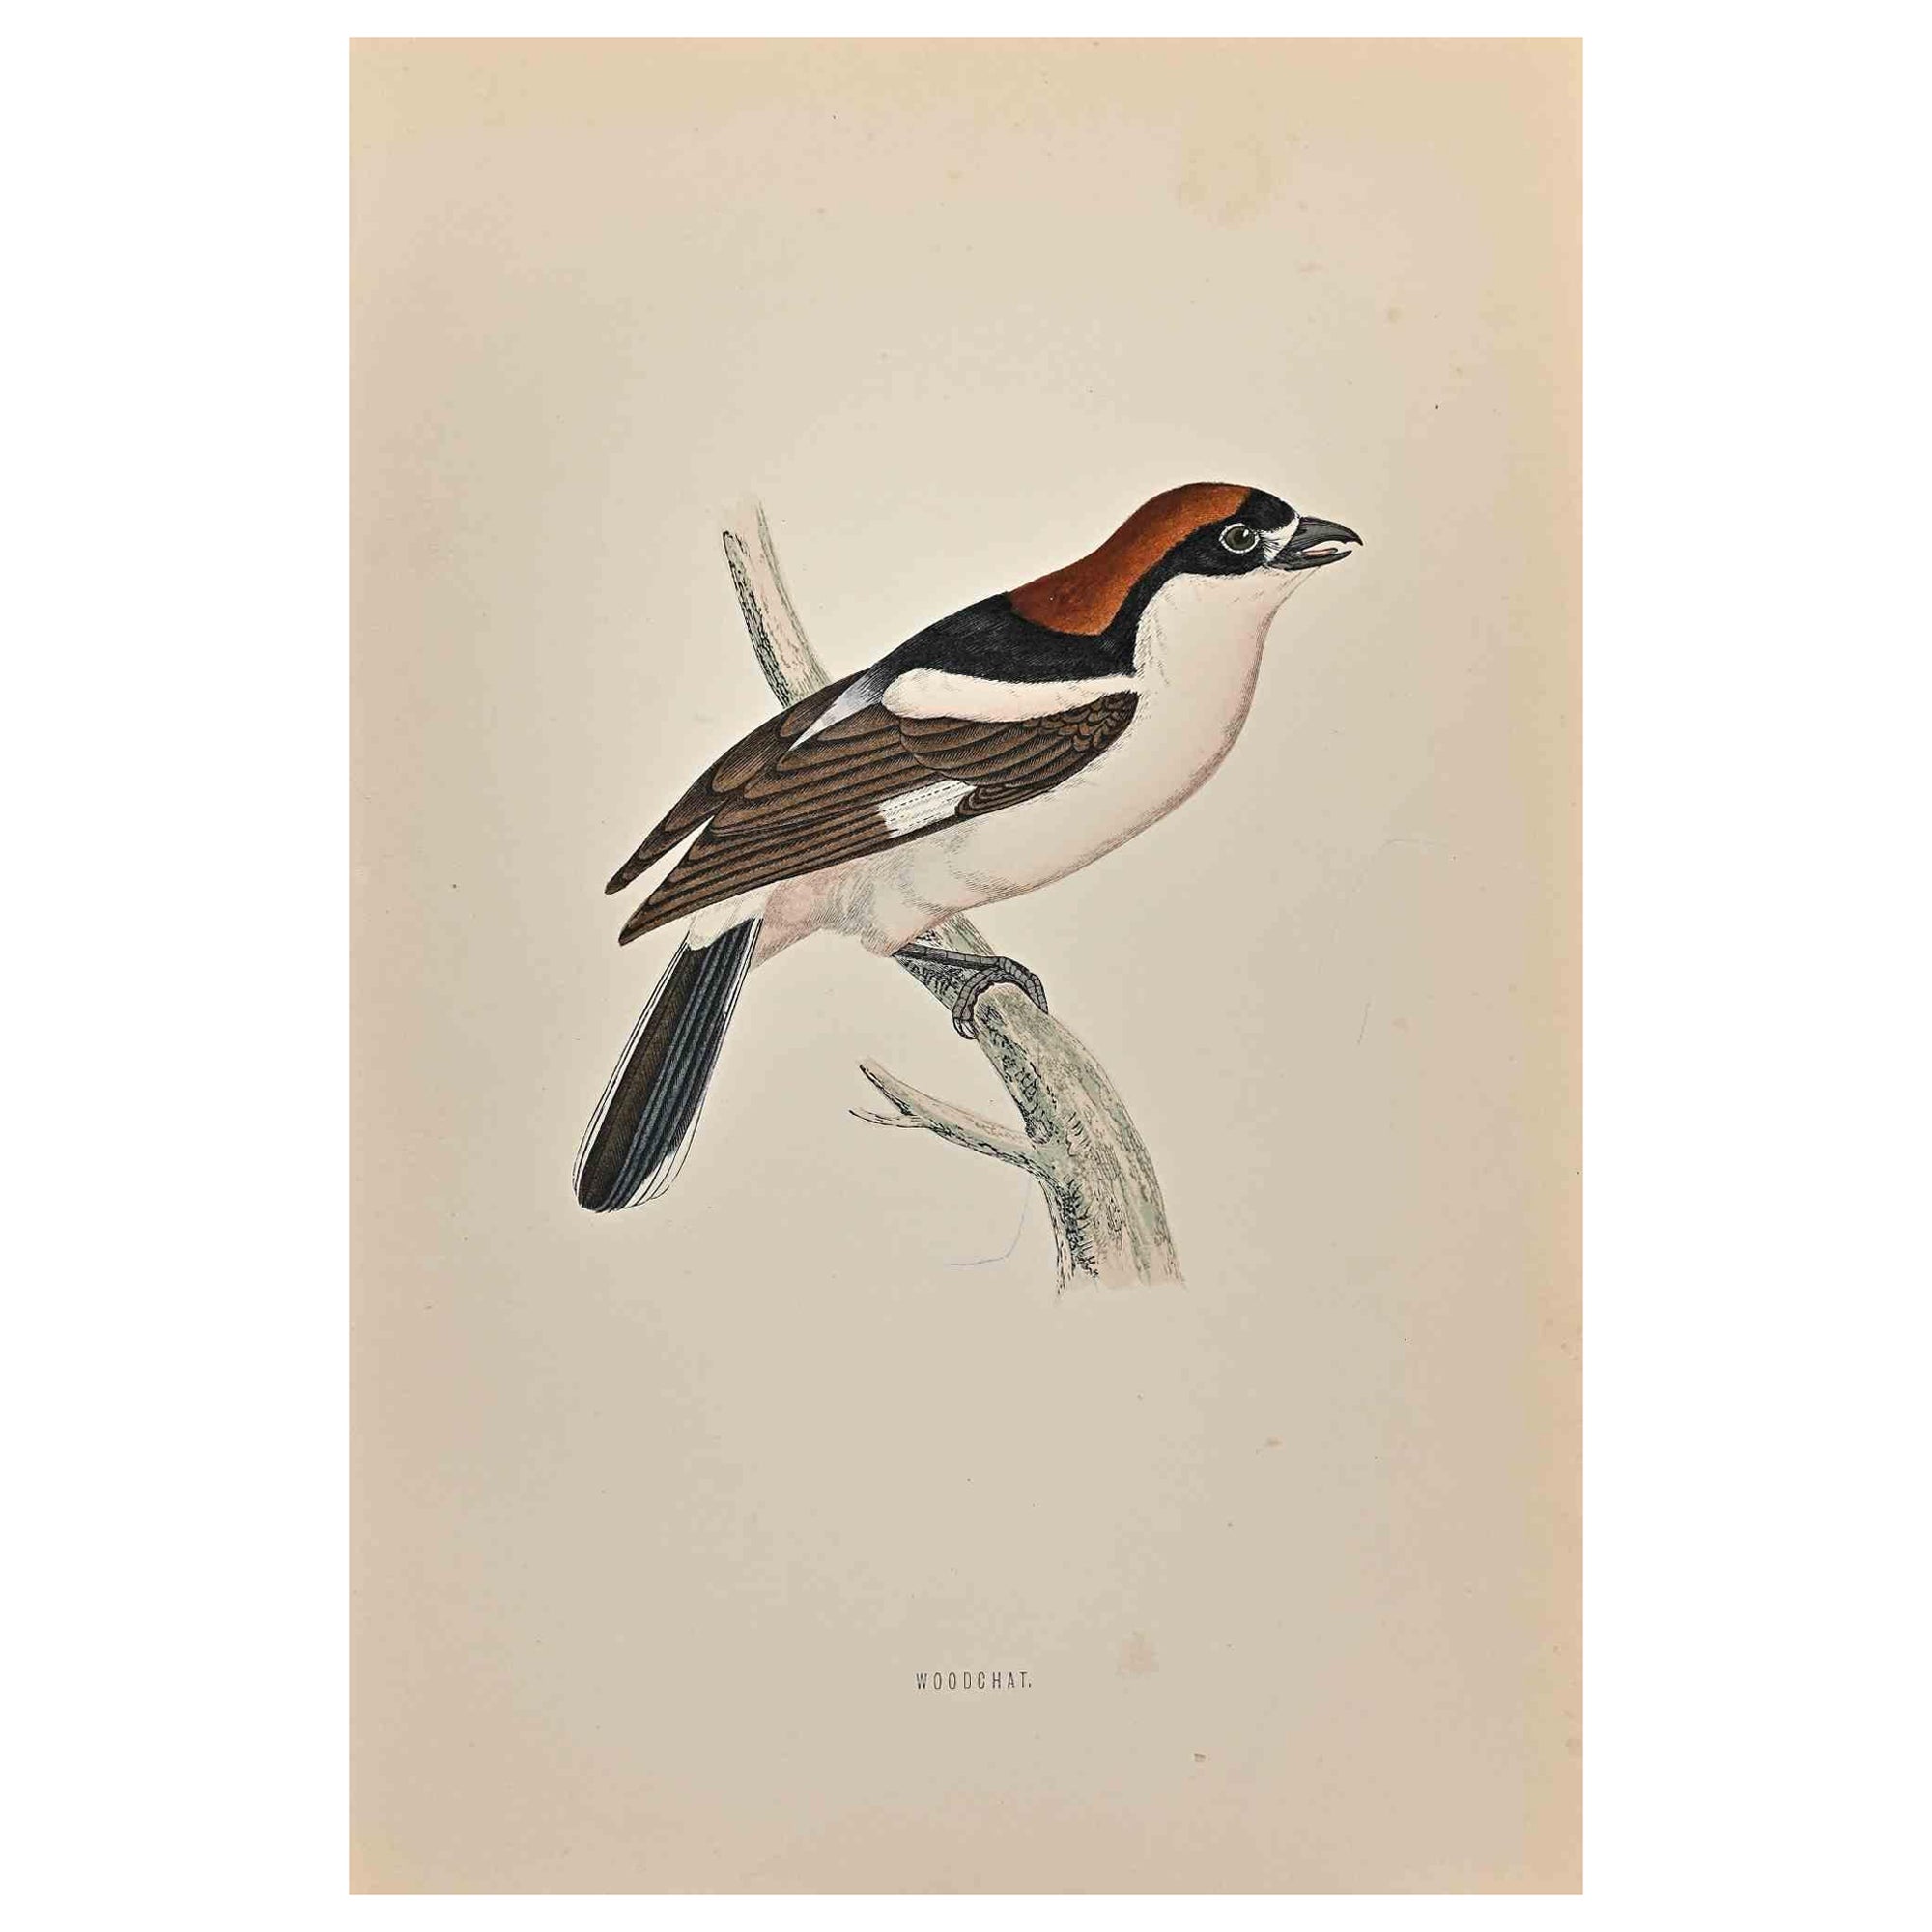 Woodchat is a modern artwork realized in 1870 by the British artist Alexander Francis Lydon (1836-1917).

Woodcut print on ivory-colored paper.

Hand-colored, published by London, Bell & Sons, 1870.  

The name of the bird is printed on the plate.